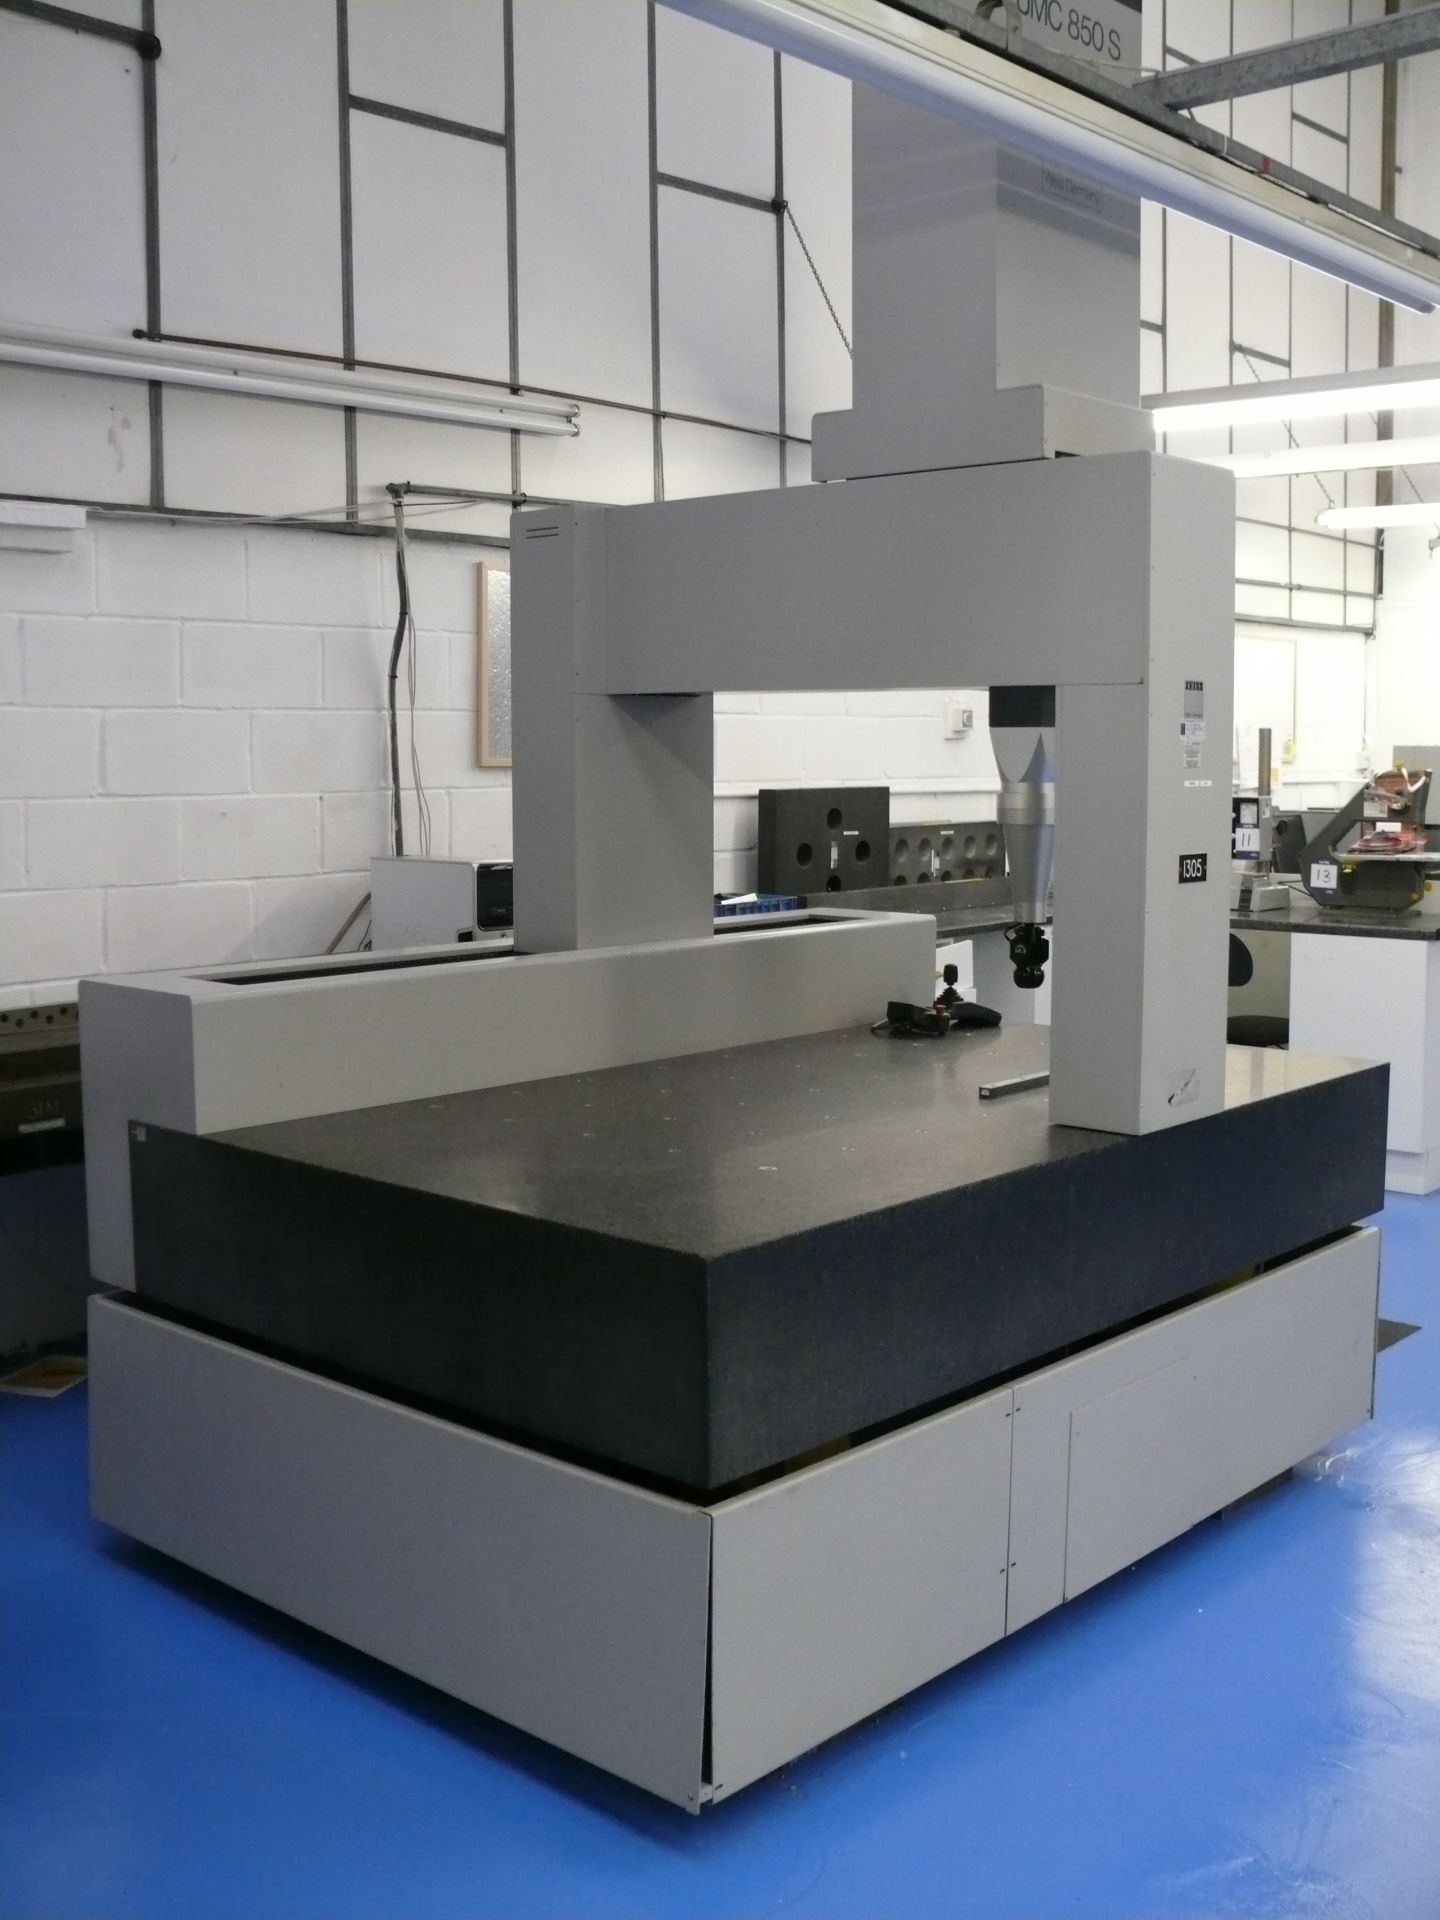 Carl Zeiss Model UMC 8505 co-ordinate measuring machine, Serial No. 74736, bed size 2120 x 1180mm, 2 - Image 2 of 4